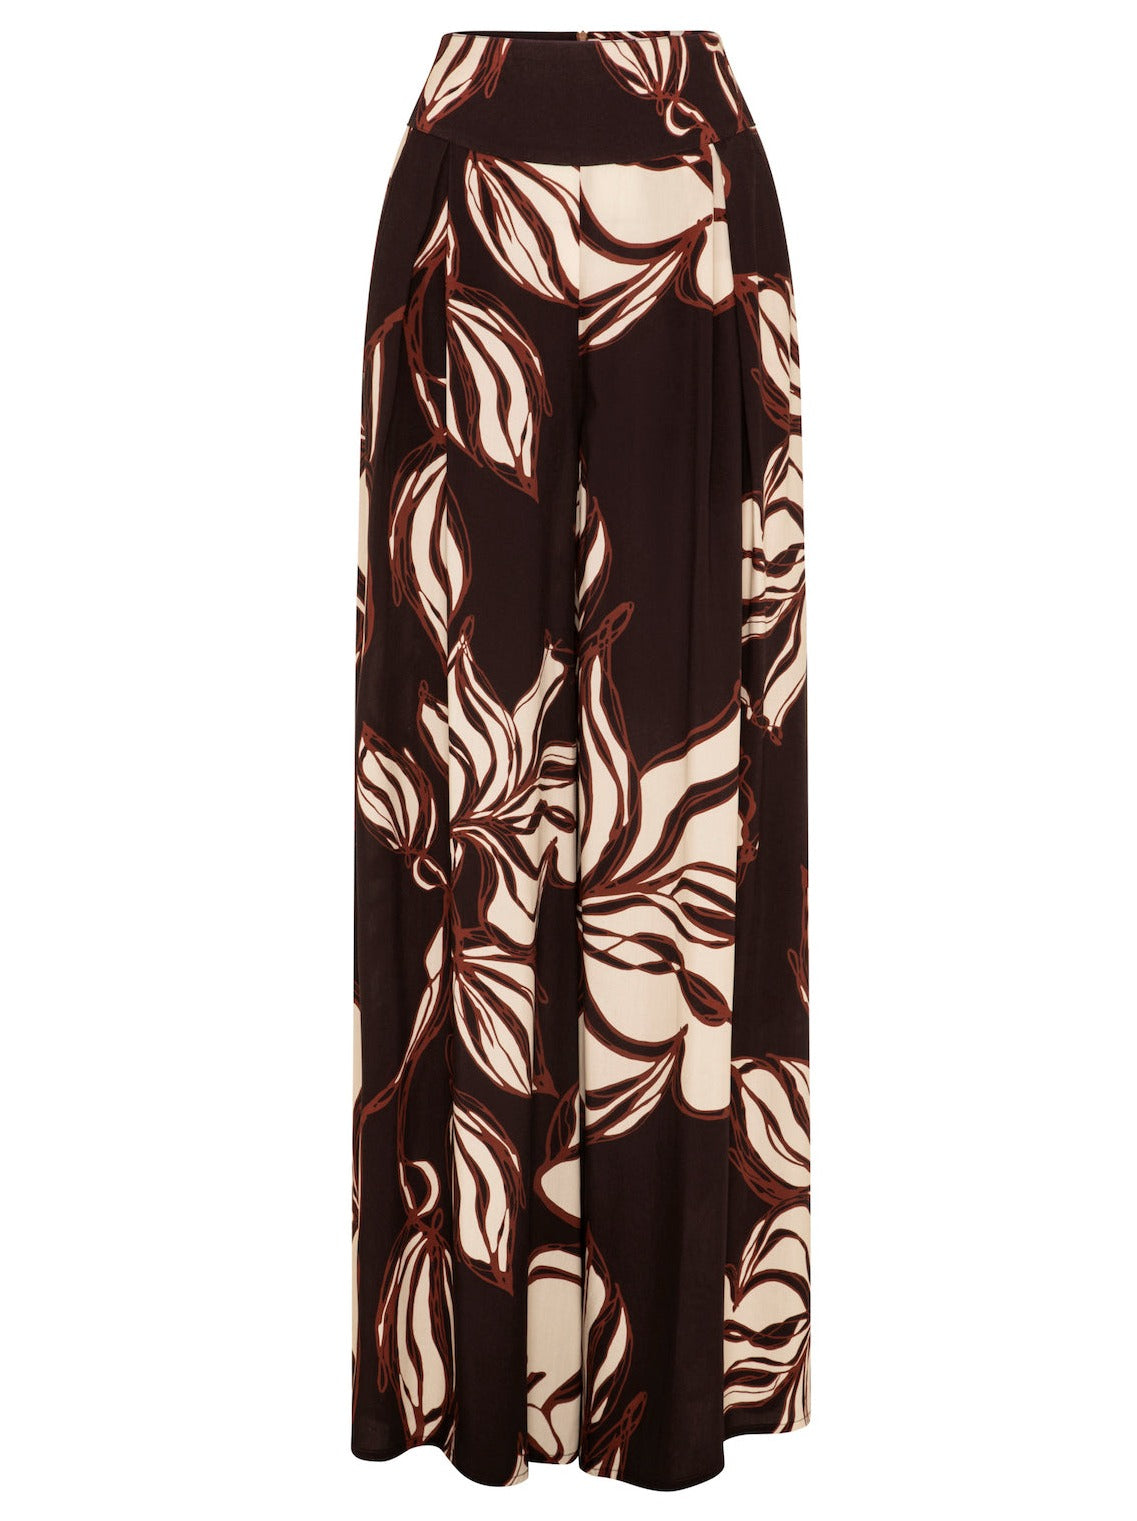 Womens boho floral wide leg palazzo pants in brown cream and red front image ghost mannequin